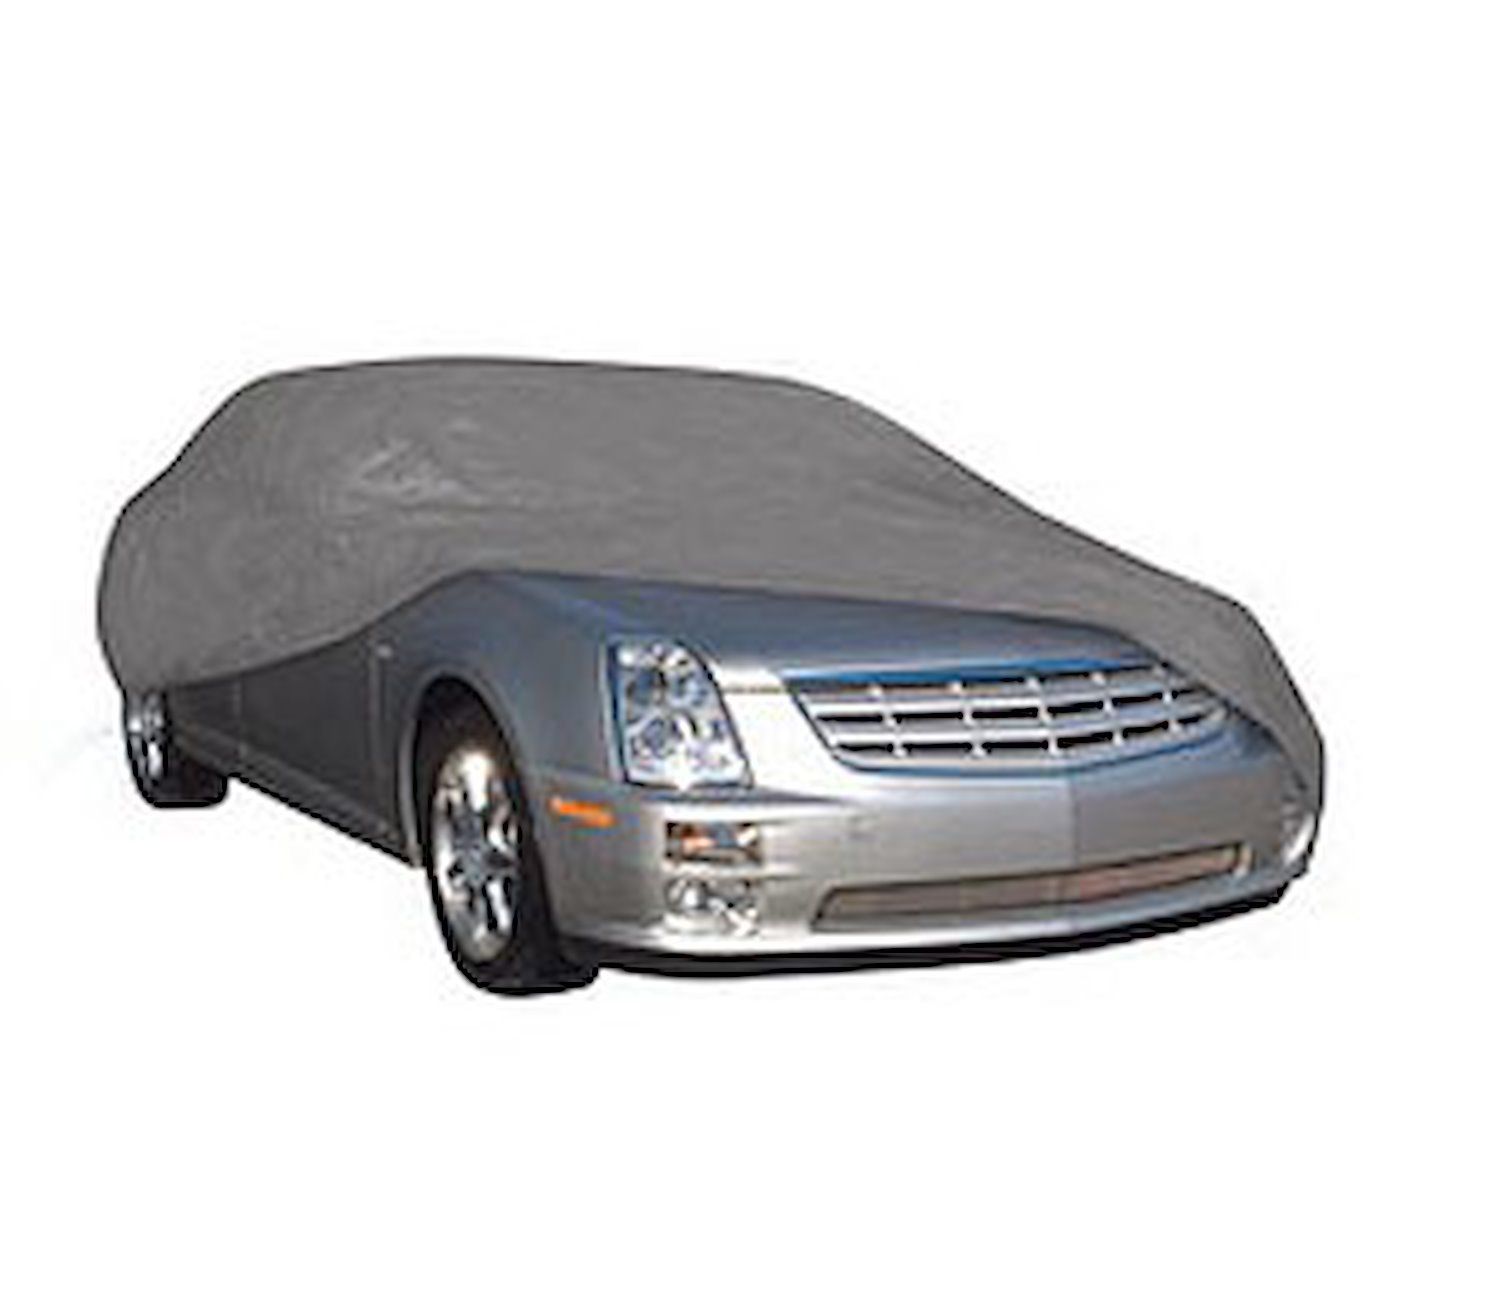 Rain Barrier Car Cover Fits Cars Up To 14" 2" in Length